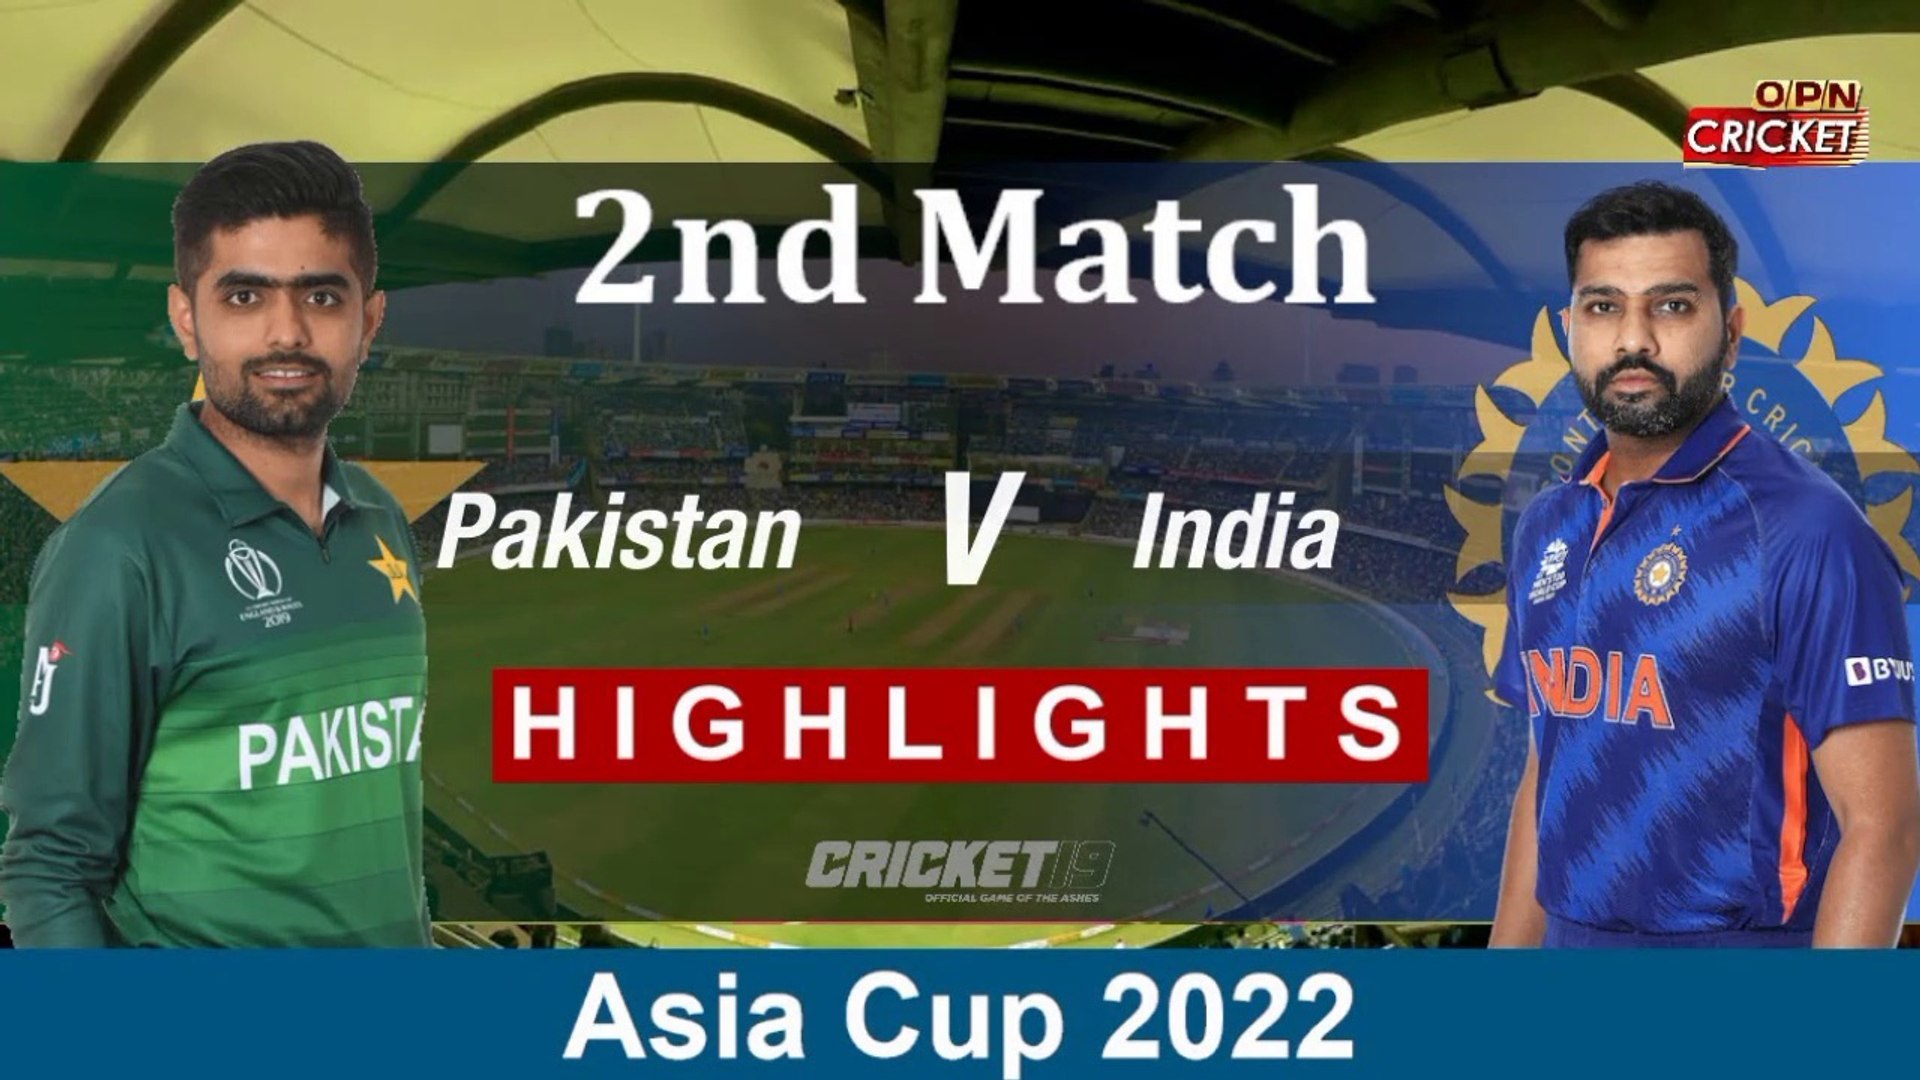 Asia Cup 2022 Match 2 Pakistan vs India Highlights today Pak vs Ind